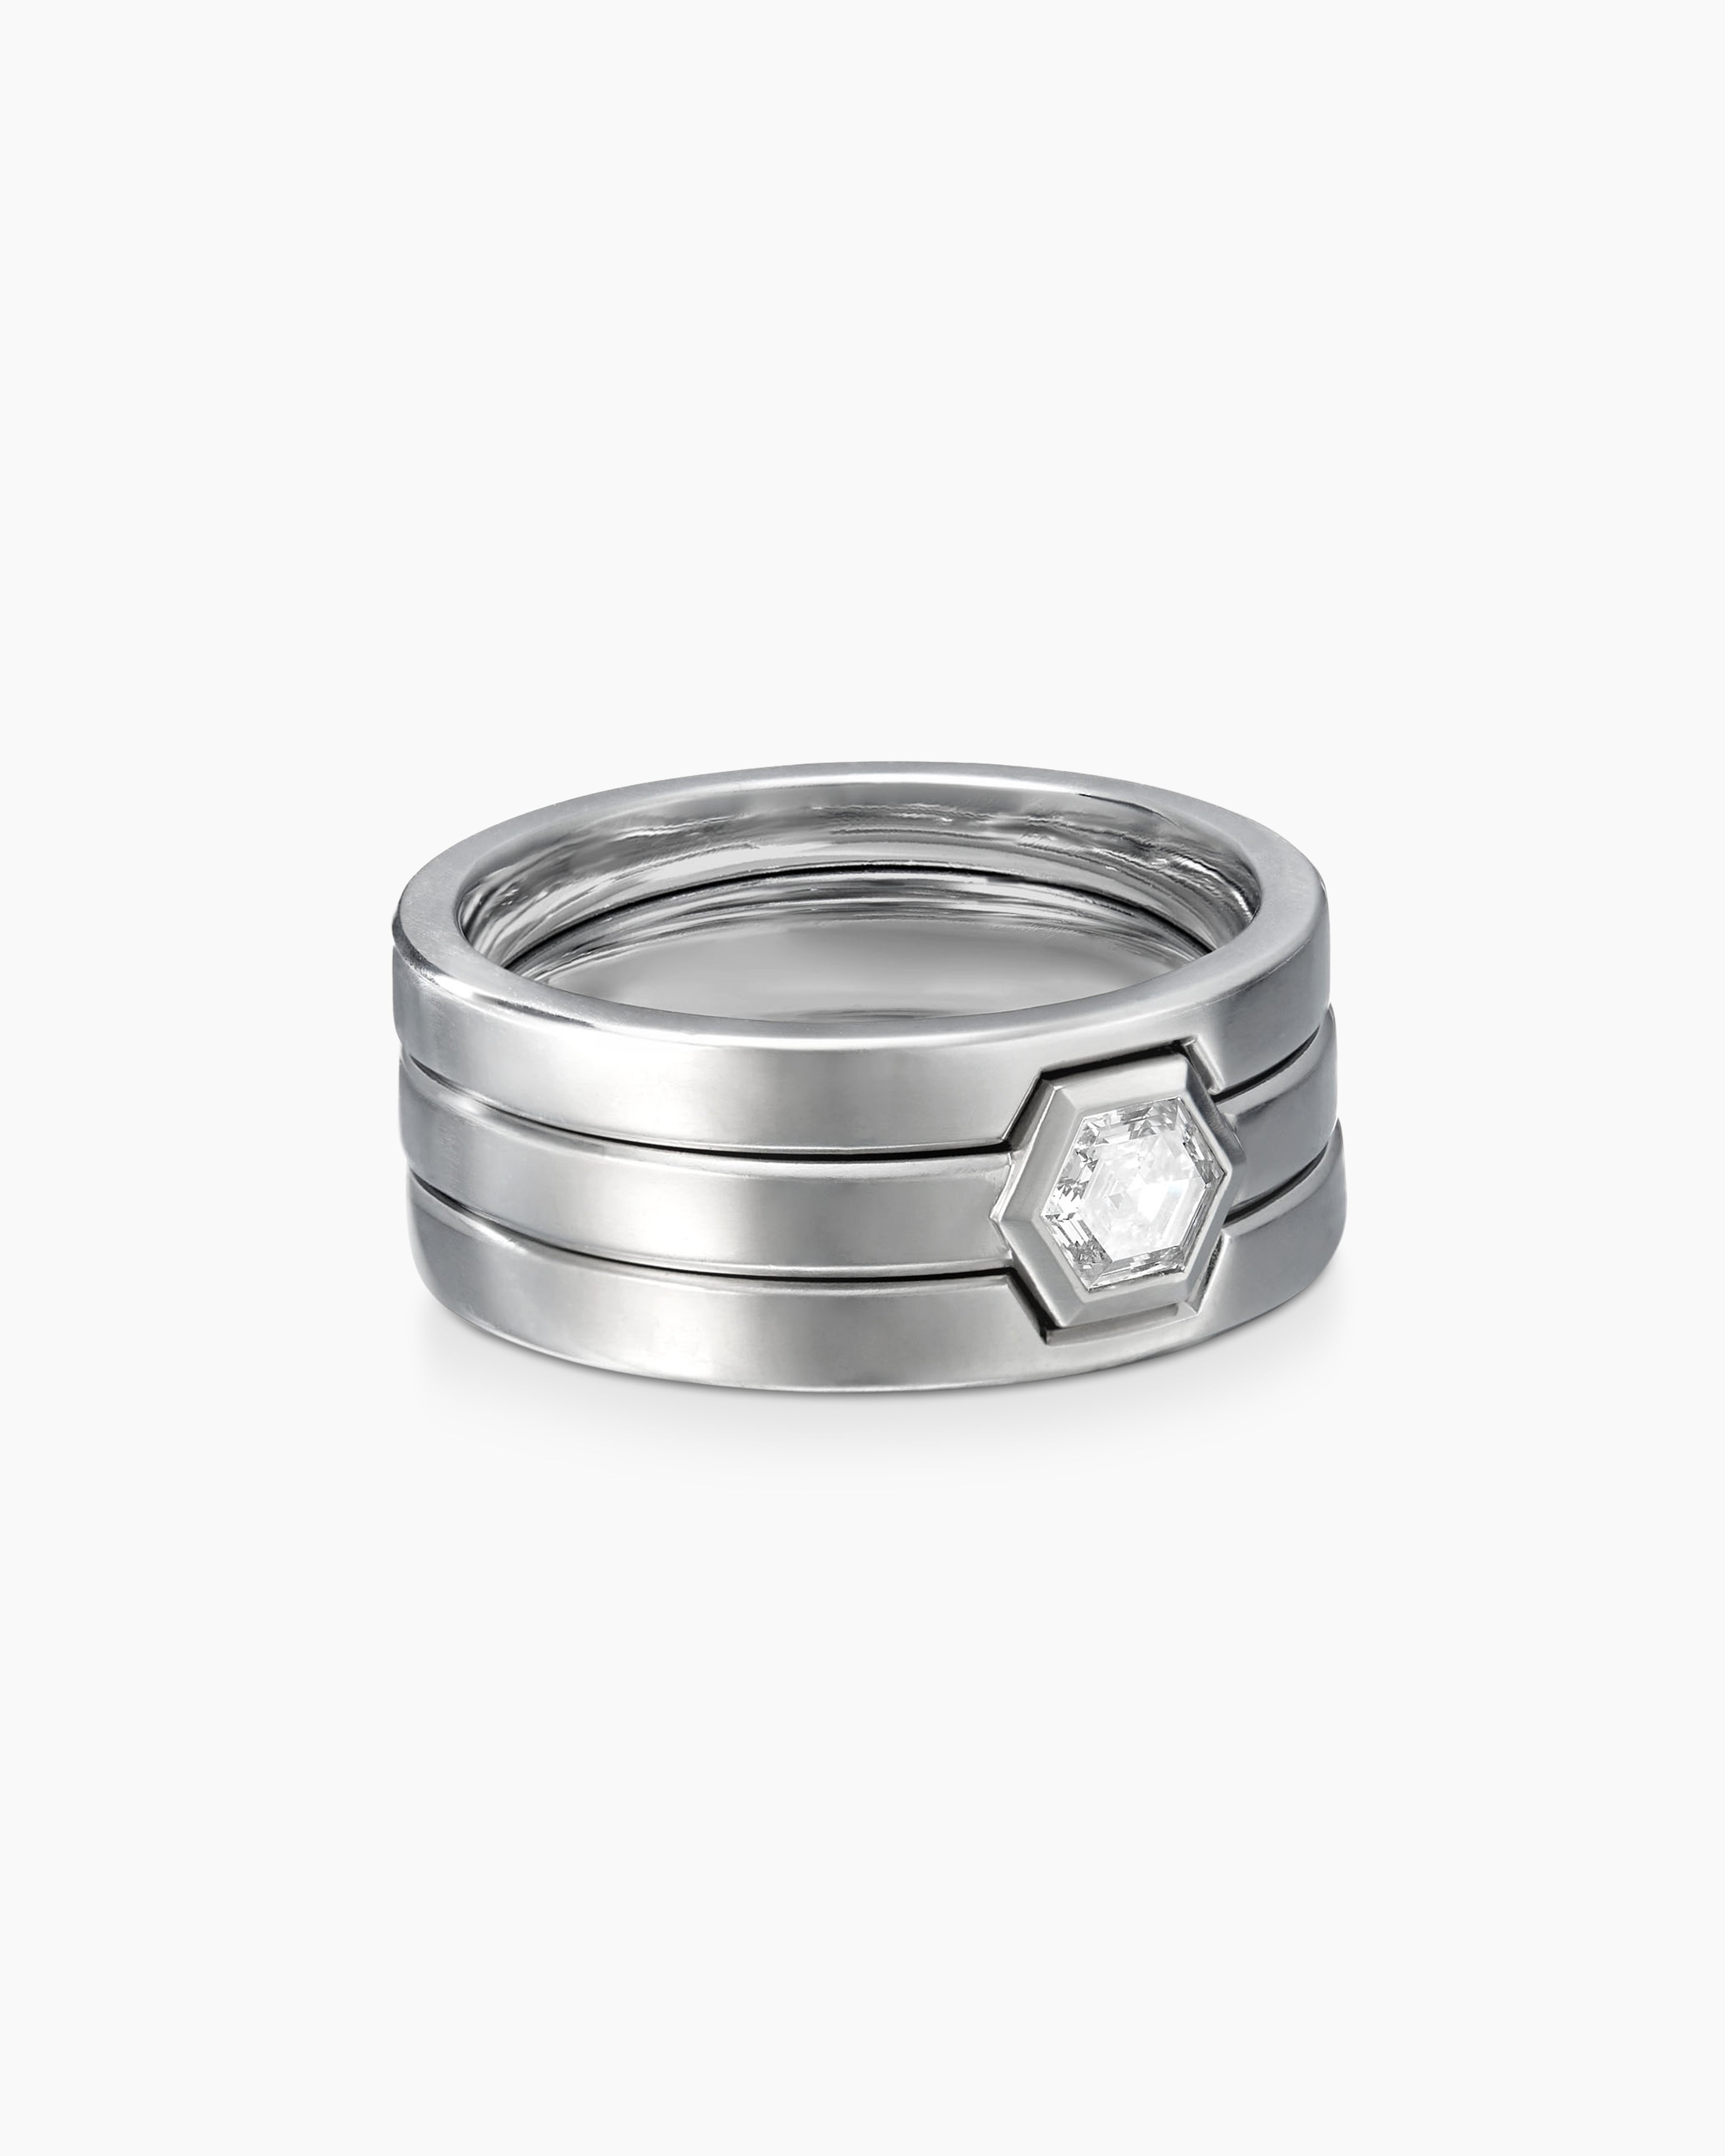 Buy Platinum Rings For Couples | Platinum Rings With Diamond |